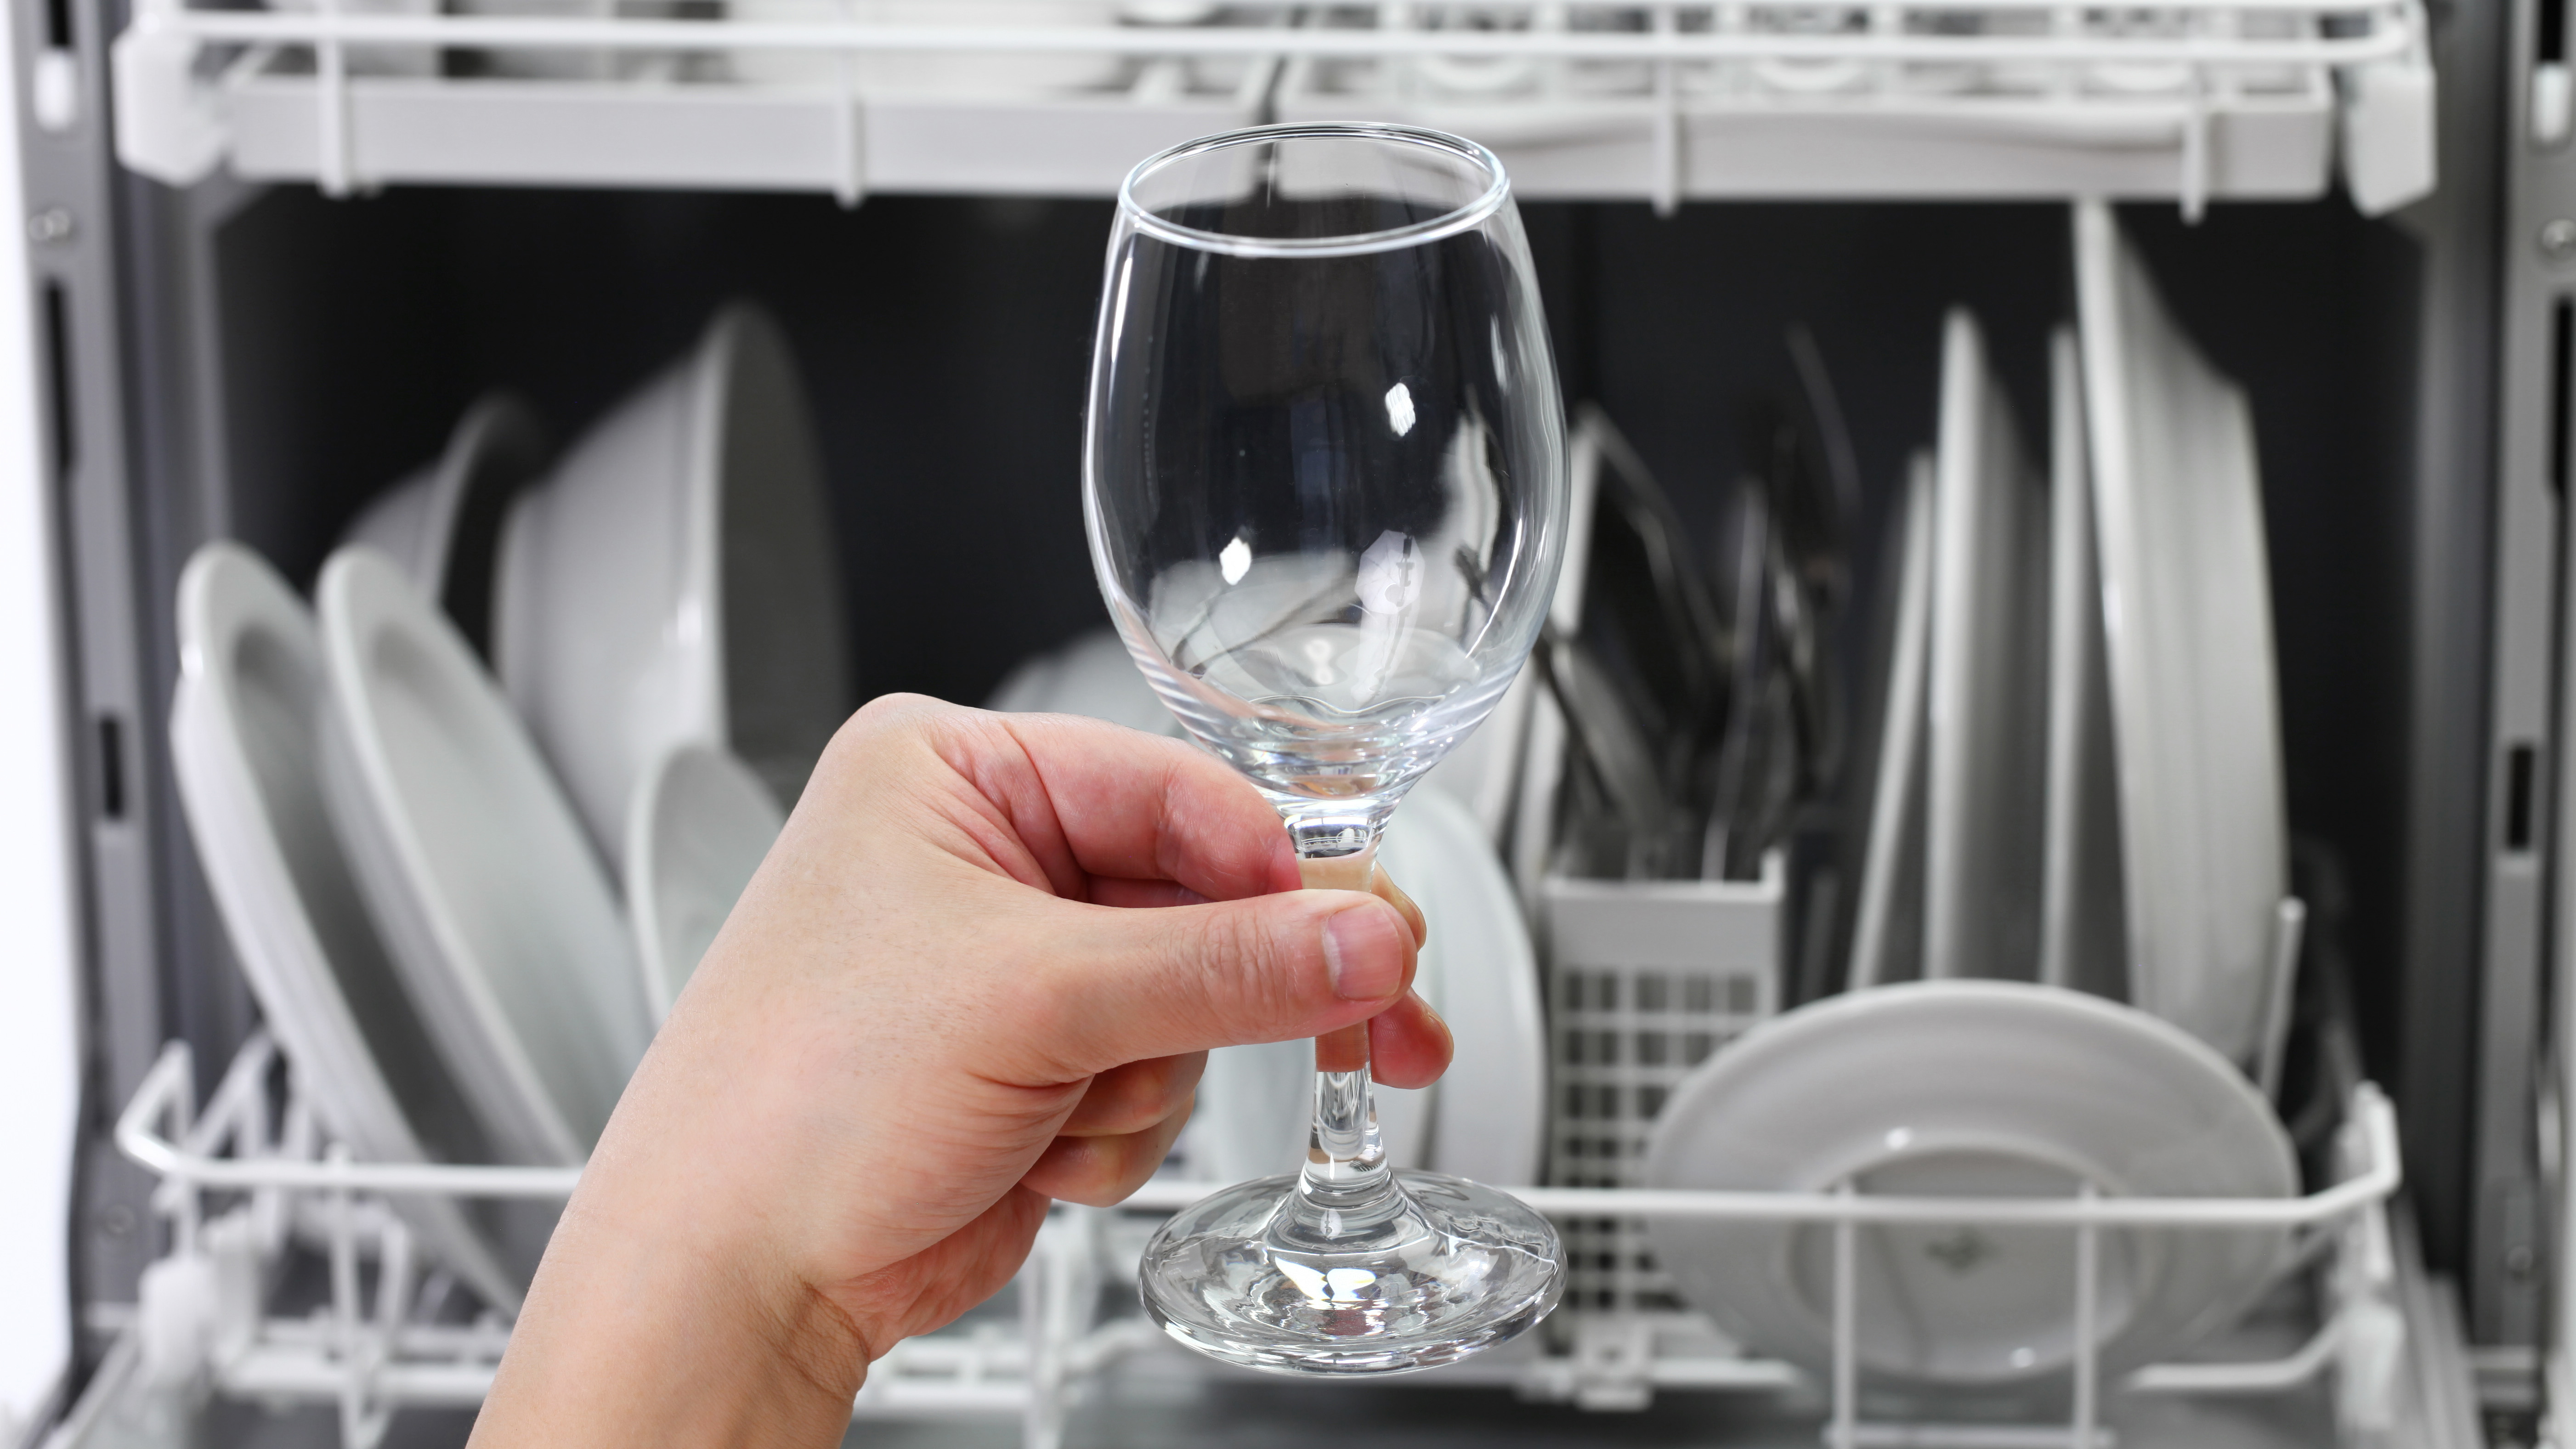 The etching of glasses in the dishwasher, and what to do about it